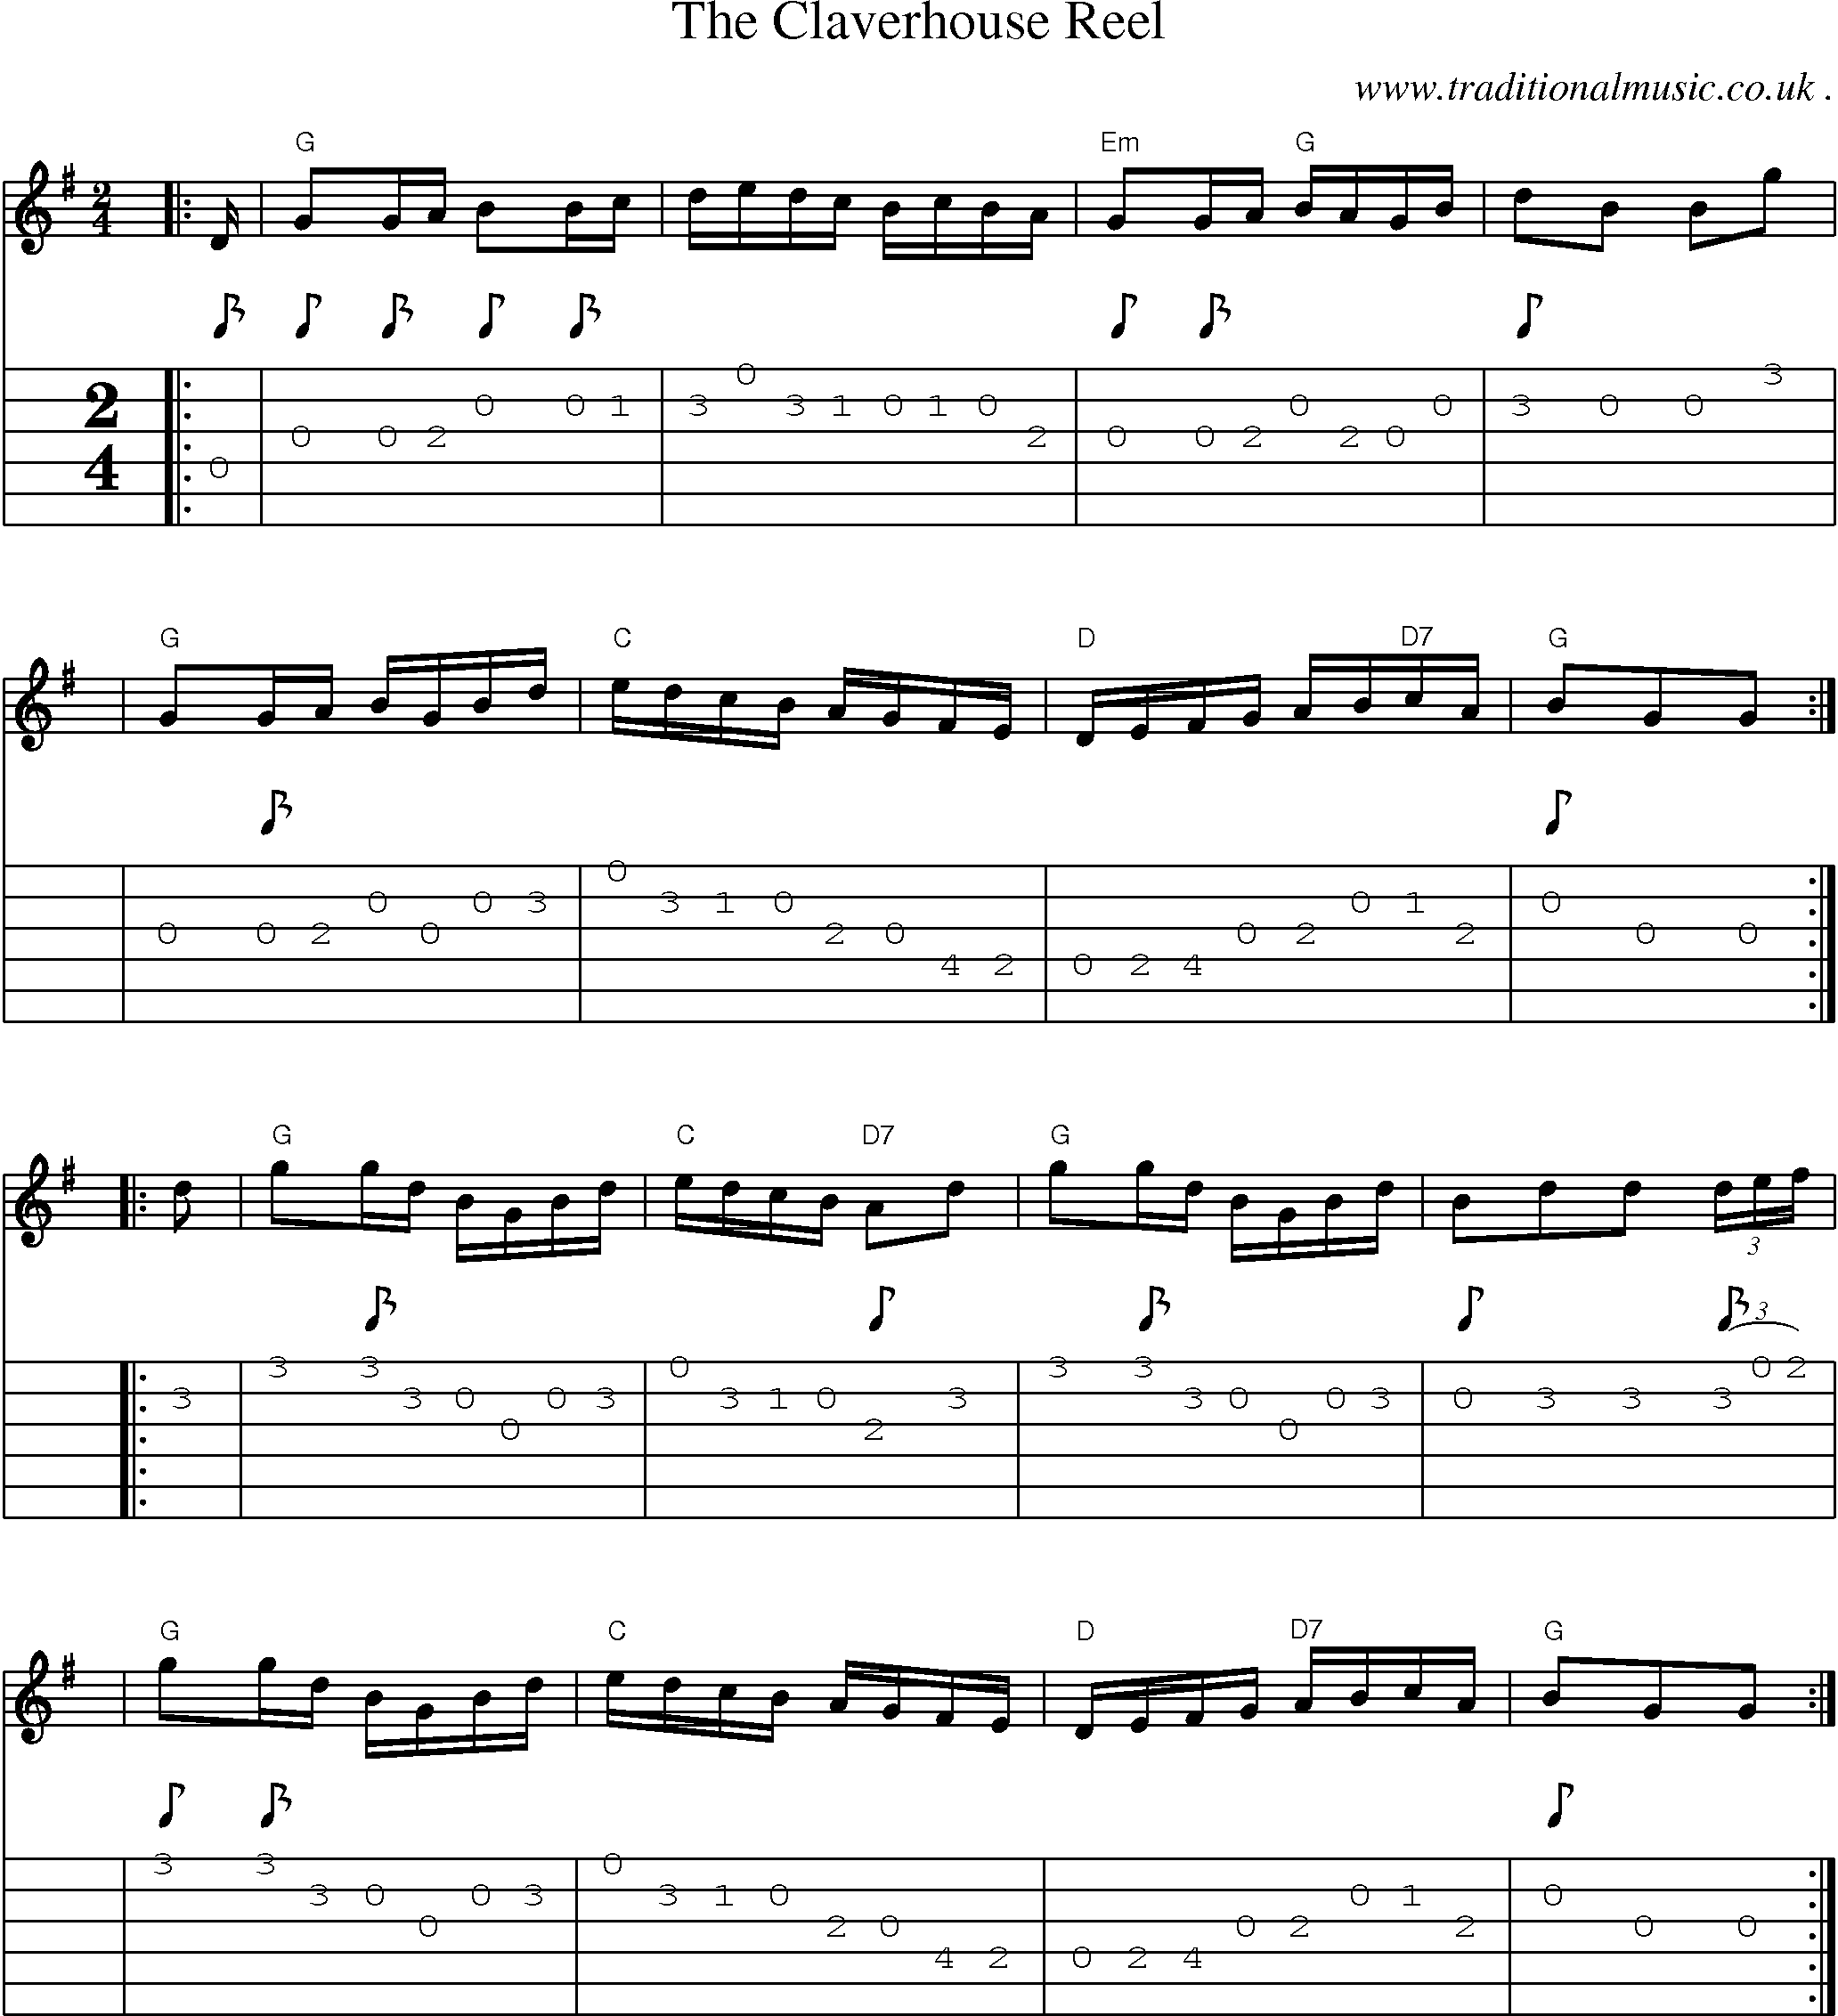 Sheet-music  score, Chords and Guitar Tabs for The Claverhouse Reel